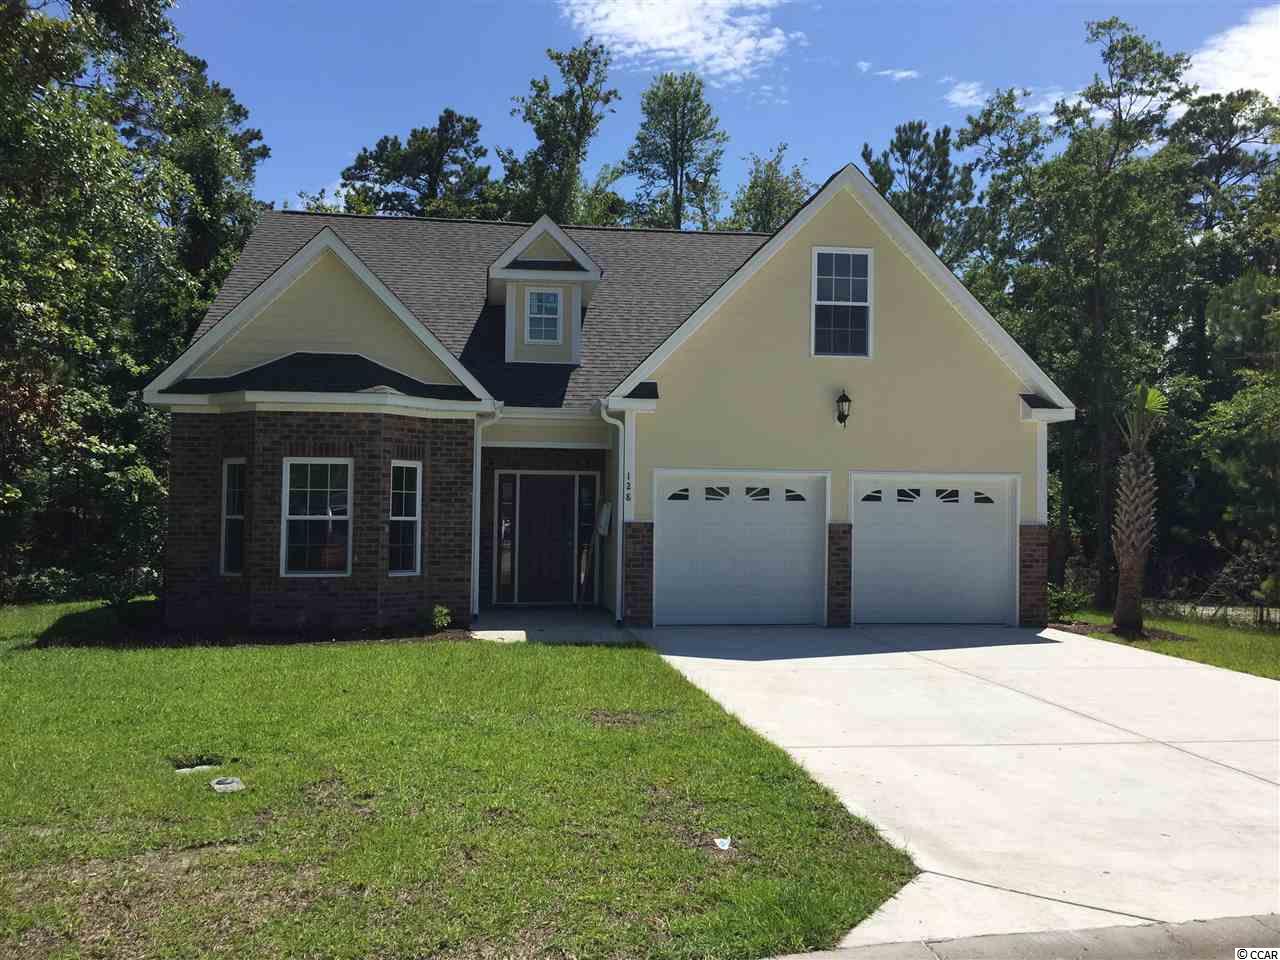 128 Swallow Tail Ct. Little River, SC 29566